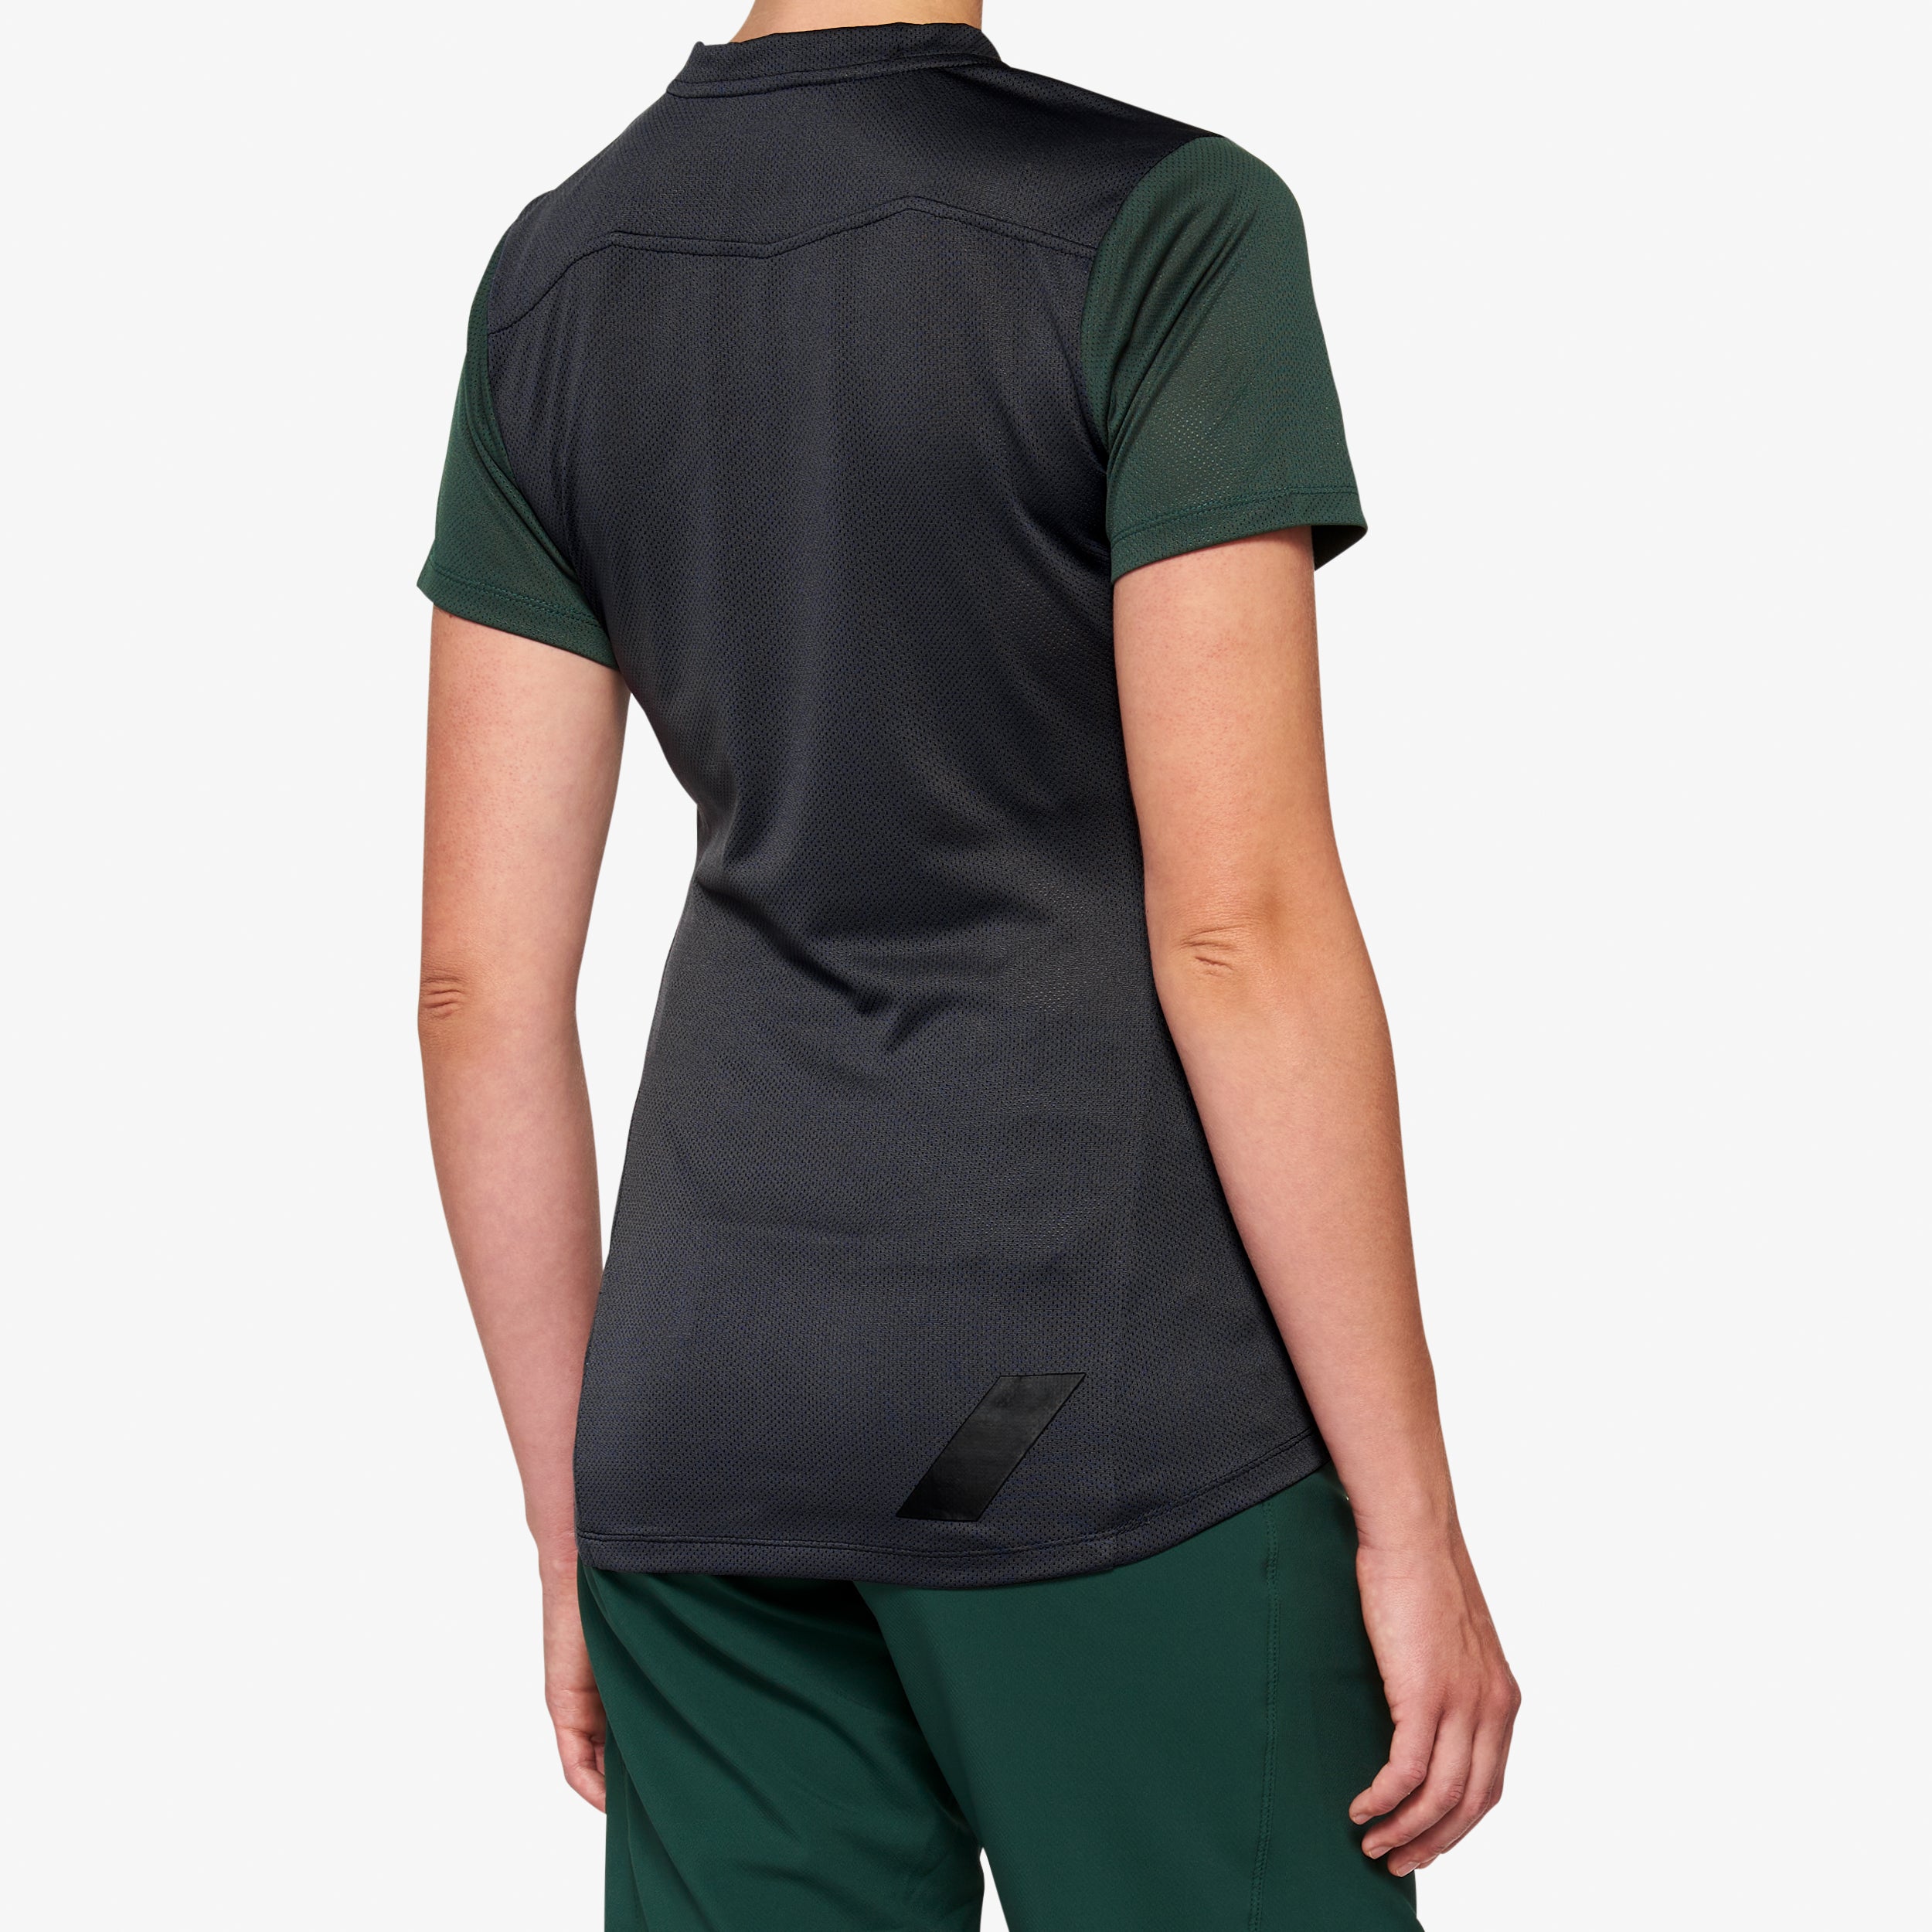 RIDECAMP Women's Short Sleeve Jersey Charcoal/Forest Green